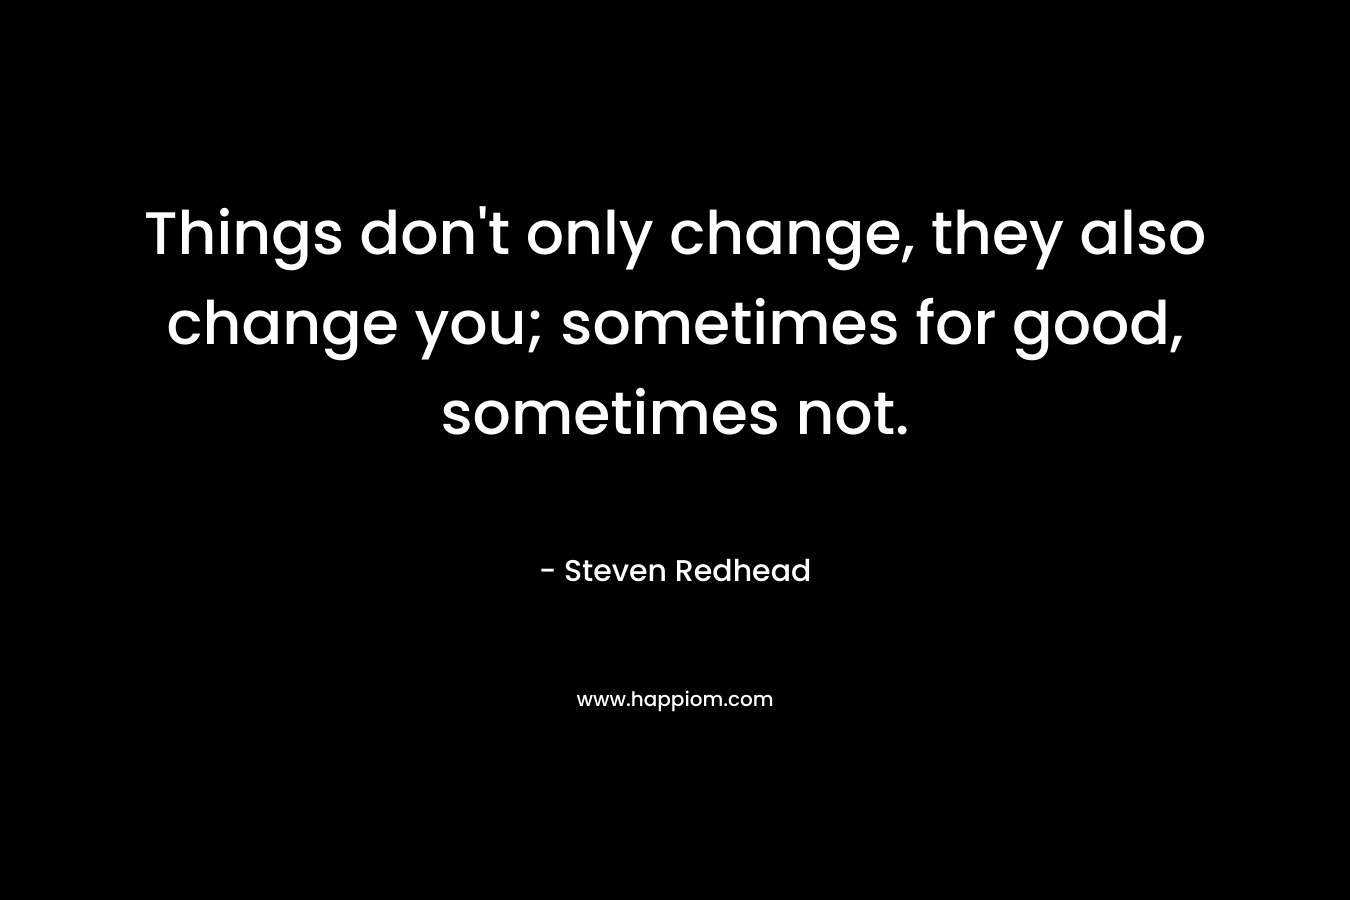 Things don't only change, they also change you; sometimes for good, sometimes not.